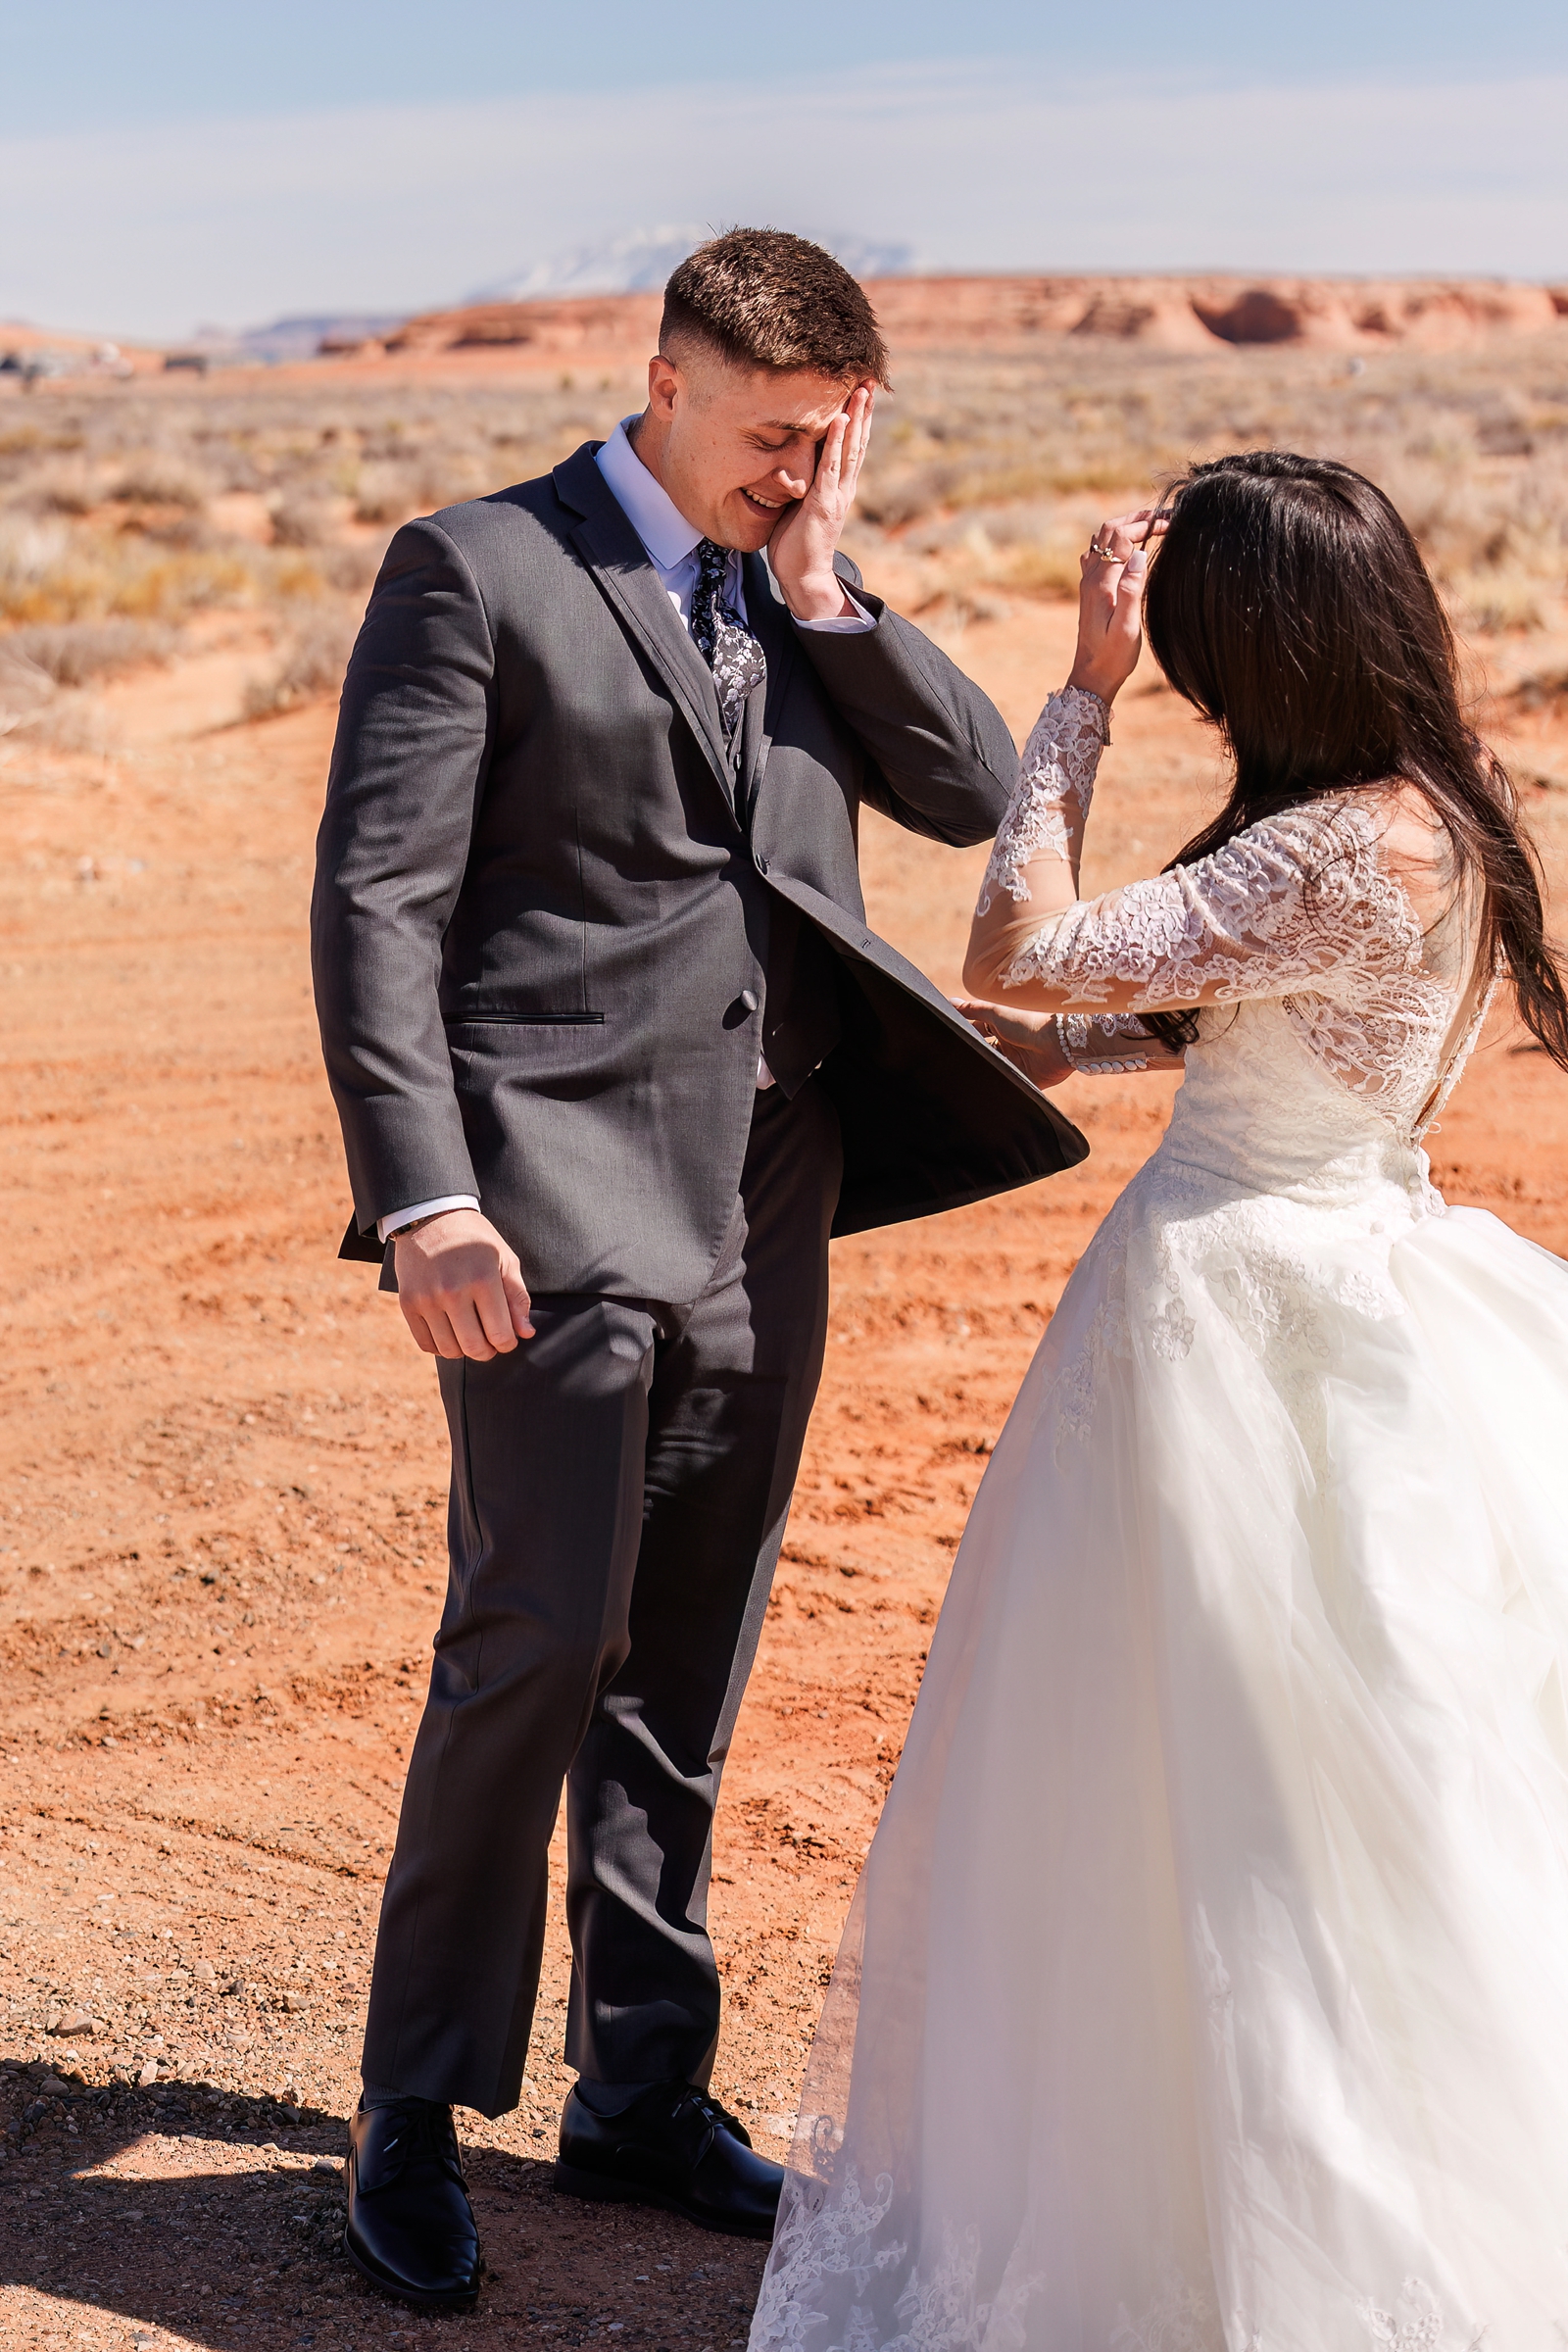 During this couples winter elopement, they hiked the wilderness of Arizona and Utah